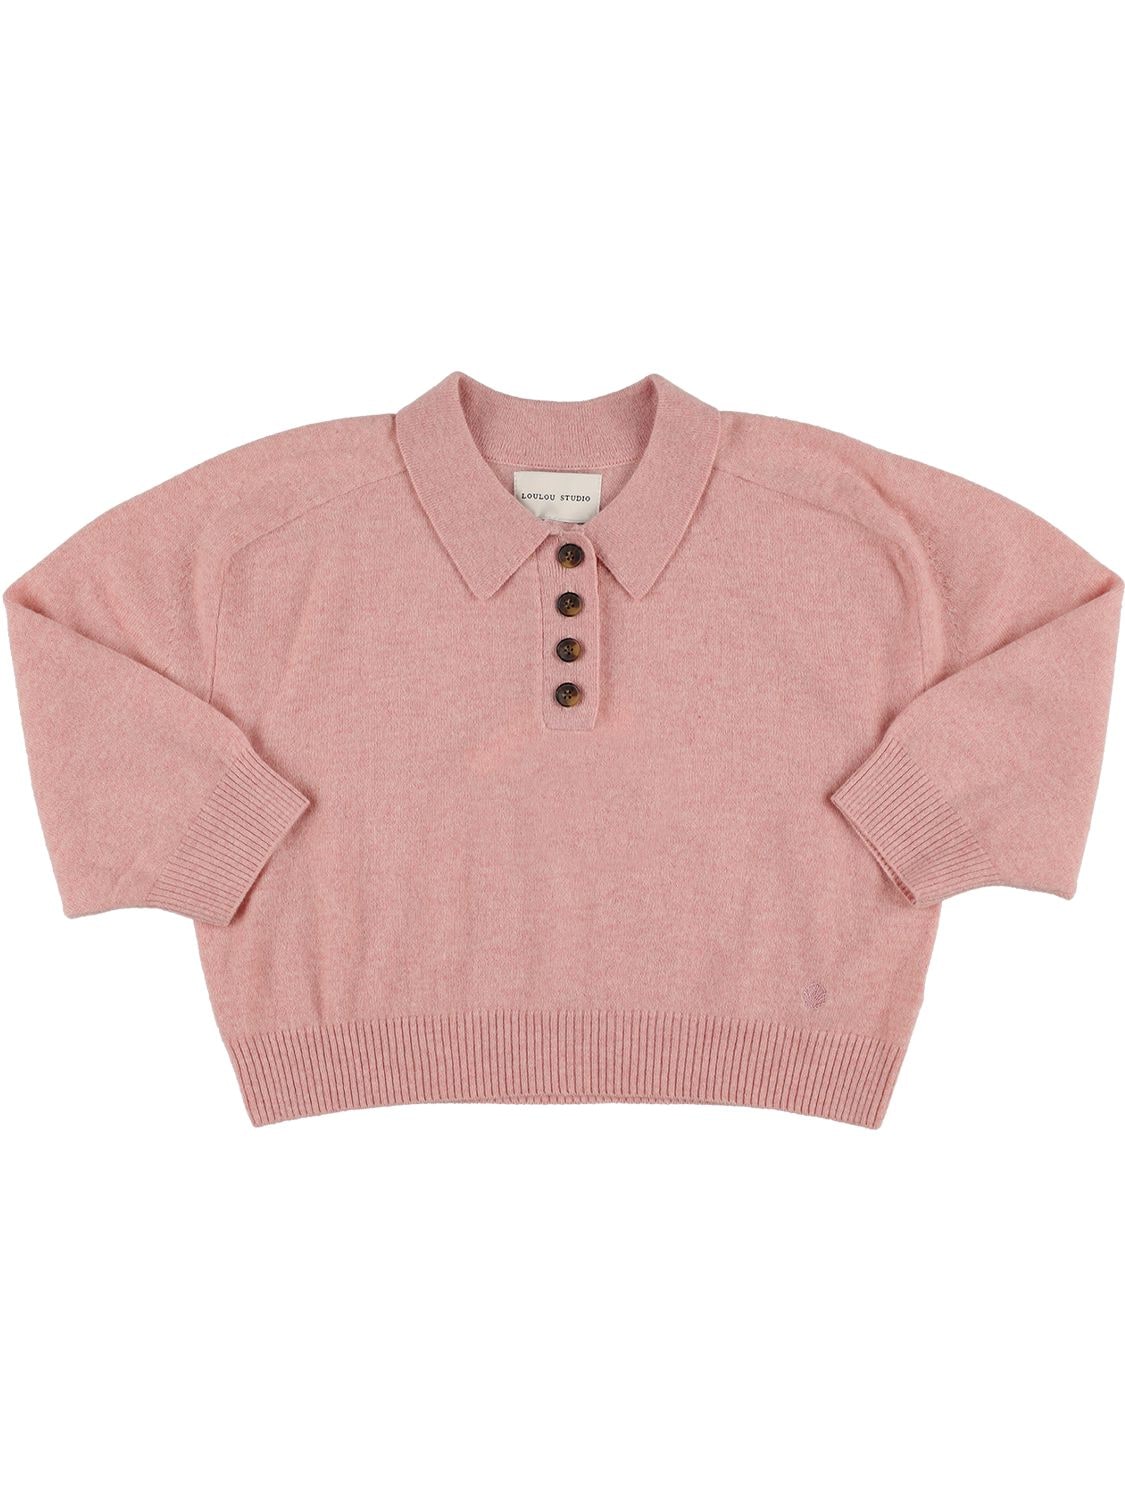 Loulou Studio Kids' Oversize Cashmere Sweater In Heather Pink